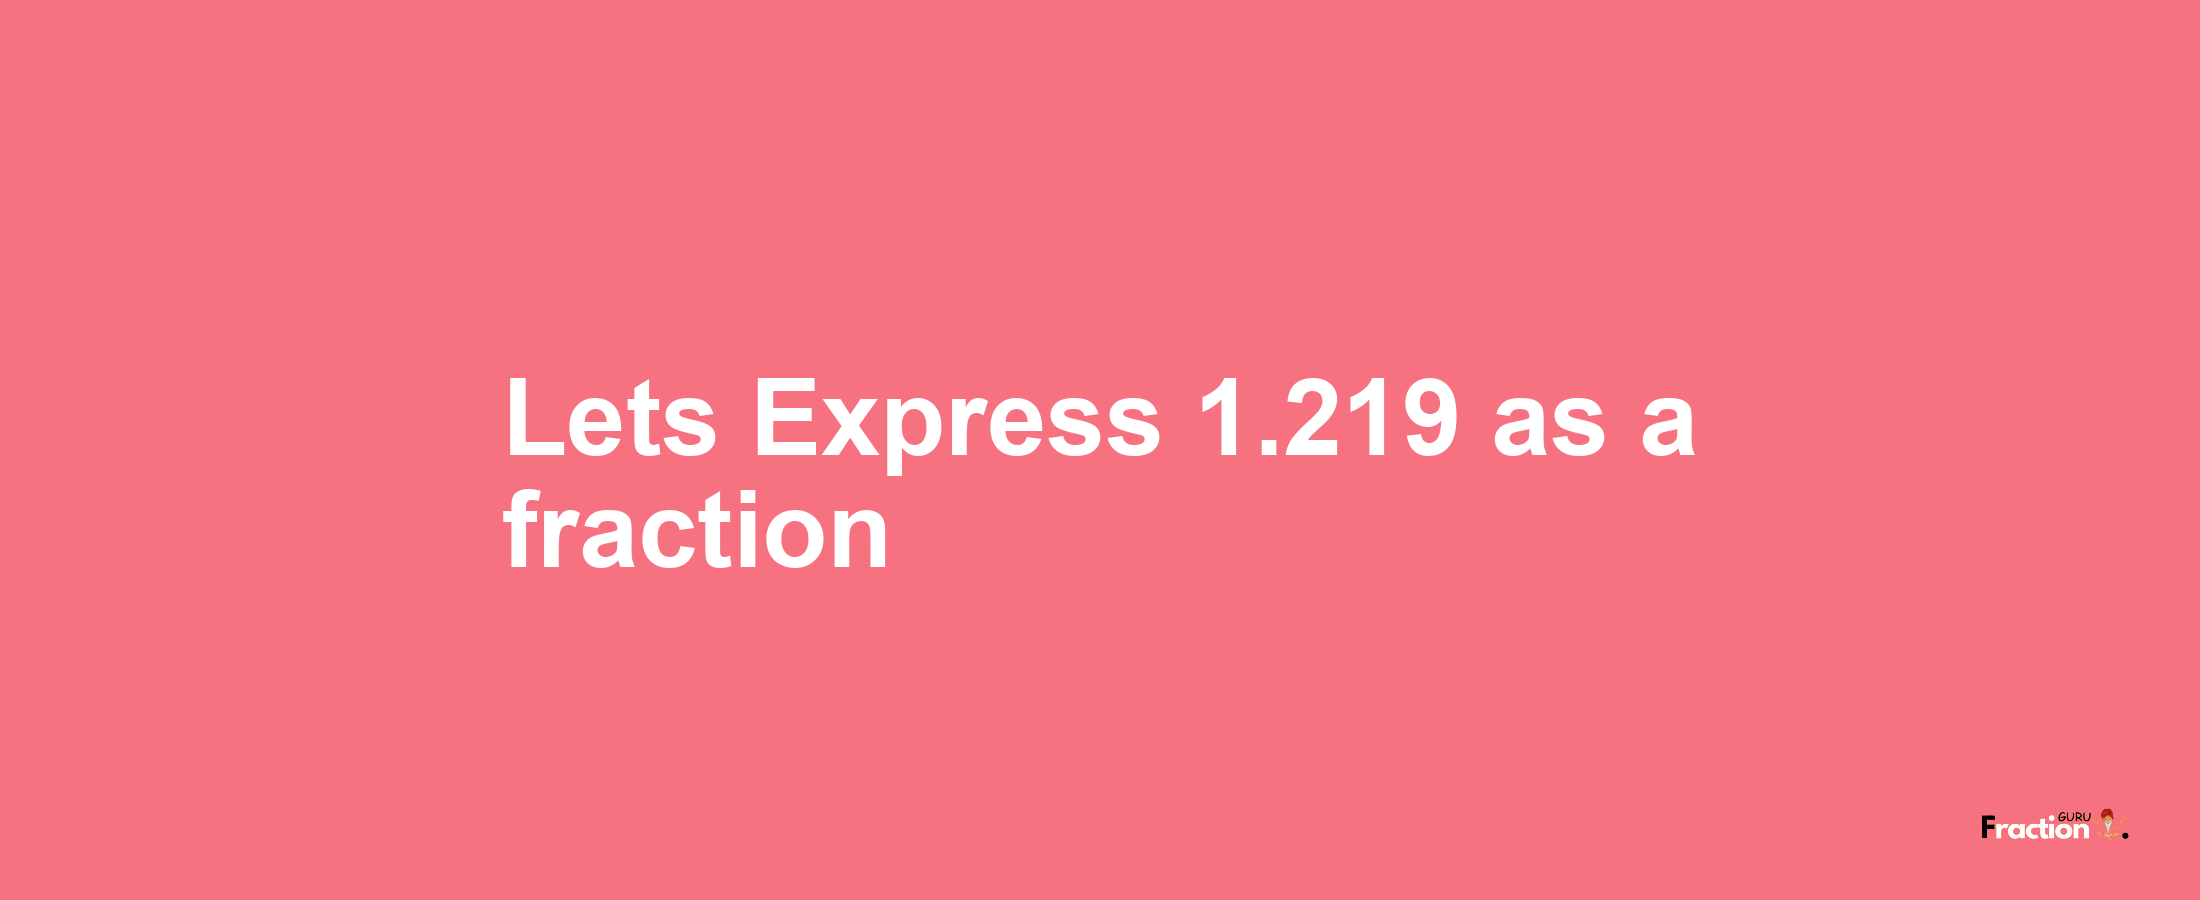 Lets Express 1.219 as afraction